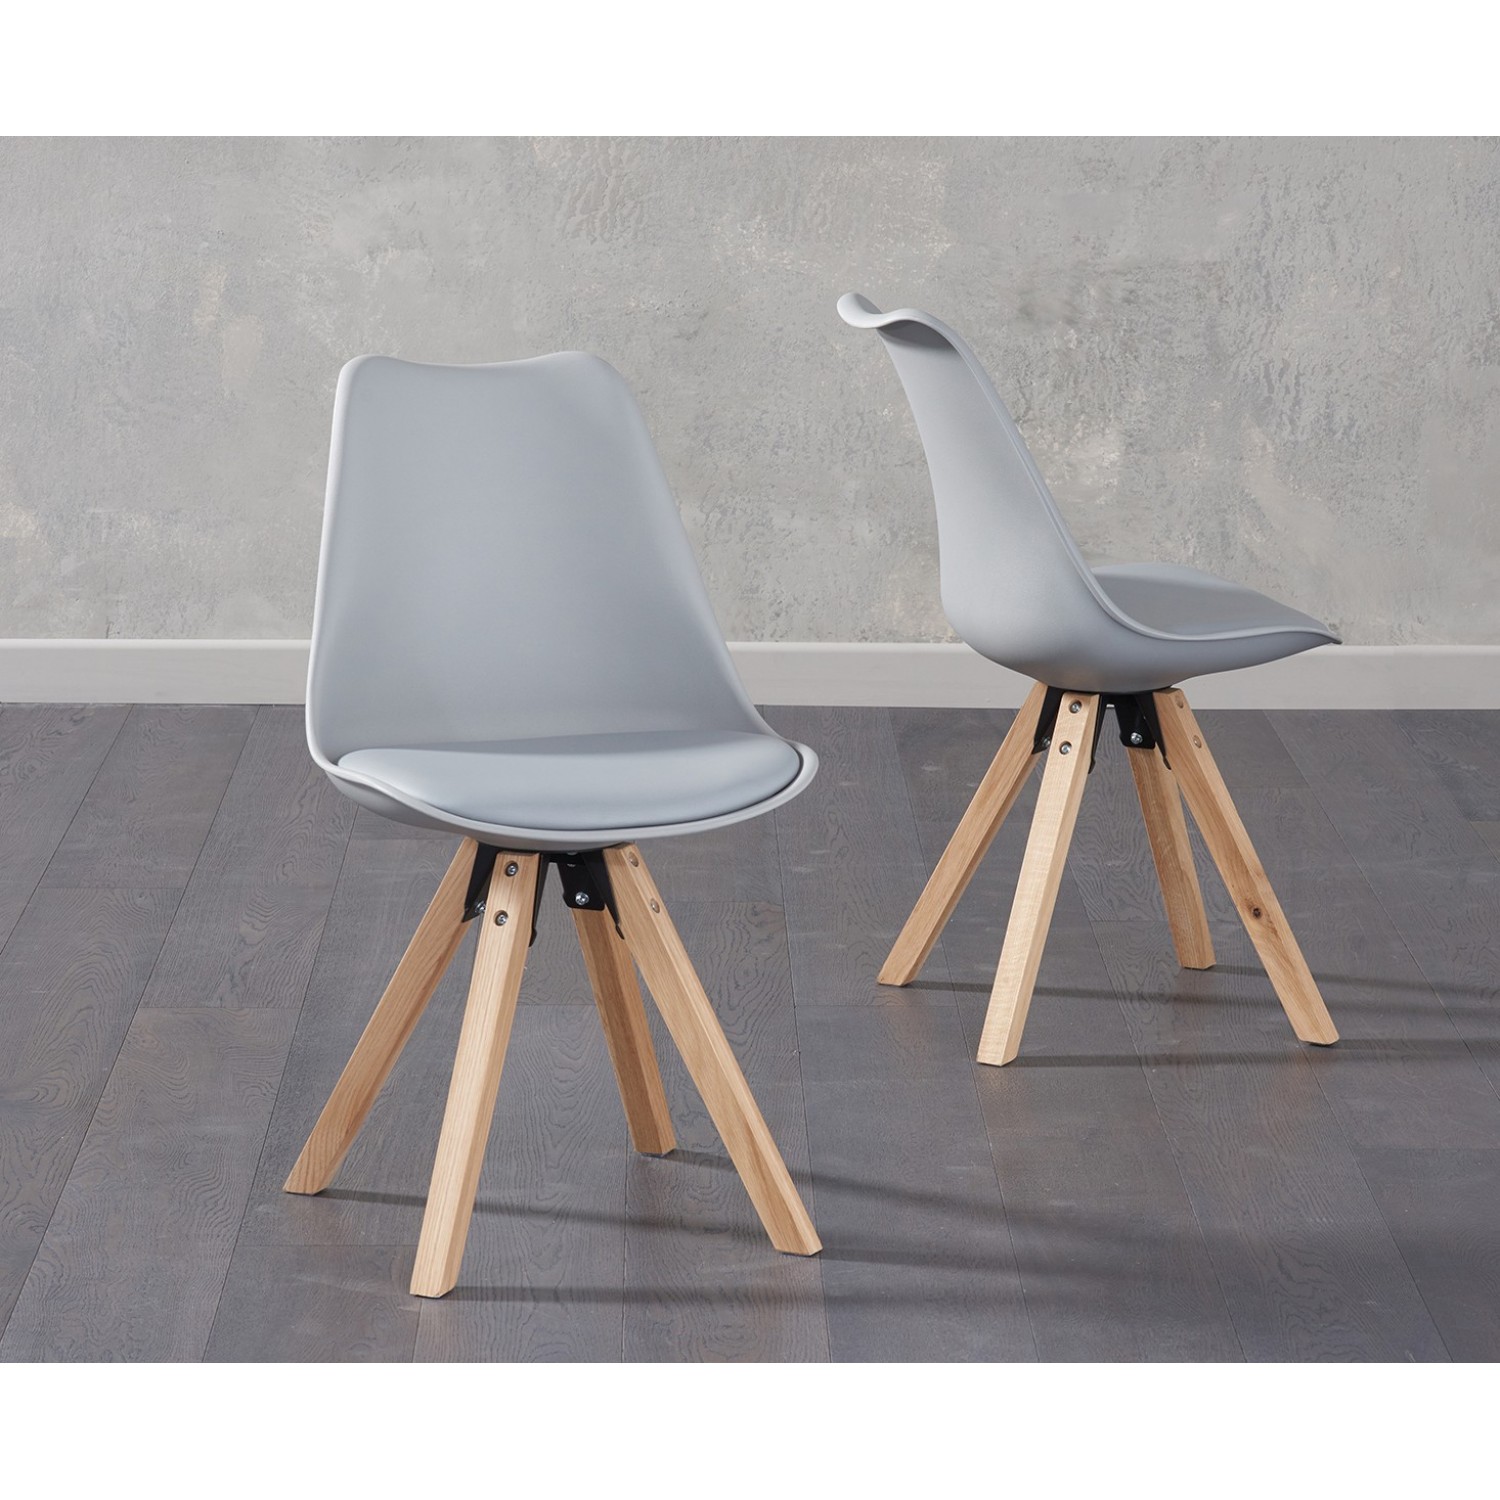 Olivier Square Wooden Leg Light Grey, Grey Dining Chairs Wooden Legs